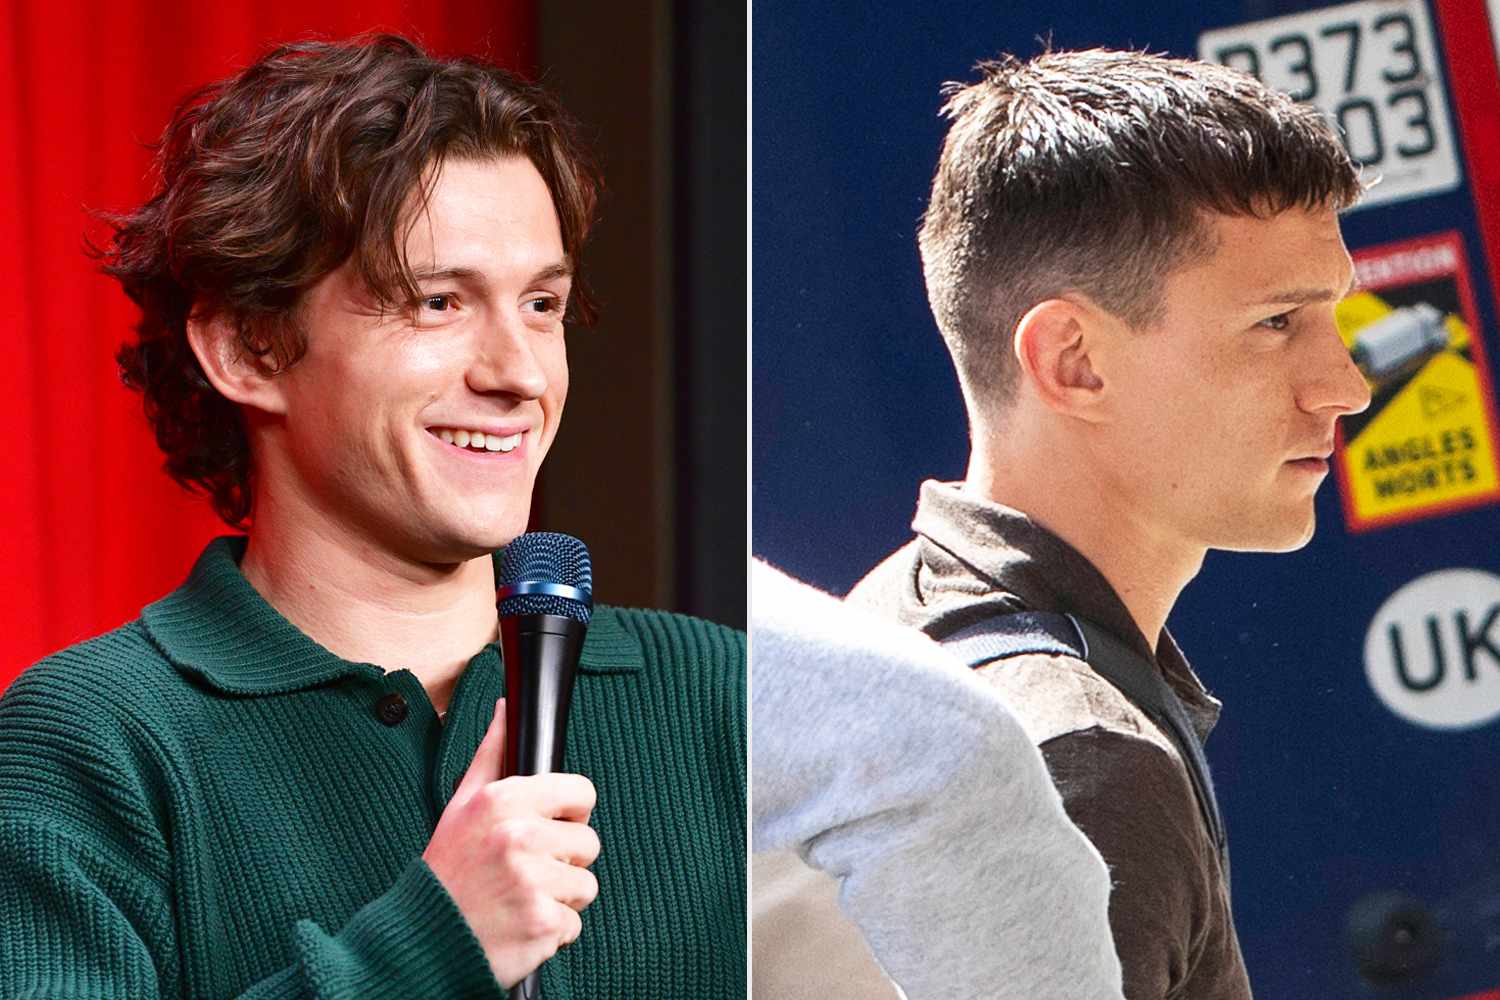 Tom Holland Ditches His Signature Curls for a New Shorter Hairstyle Ahead of “Romeo & Juliet” Role in London